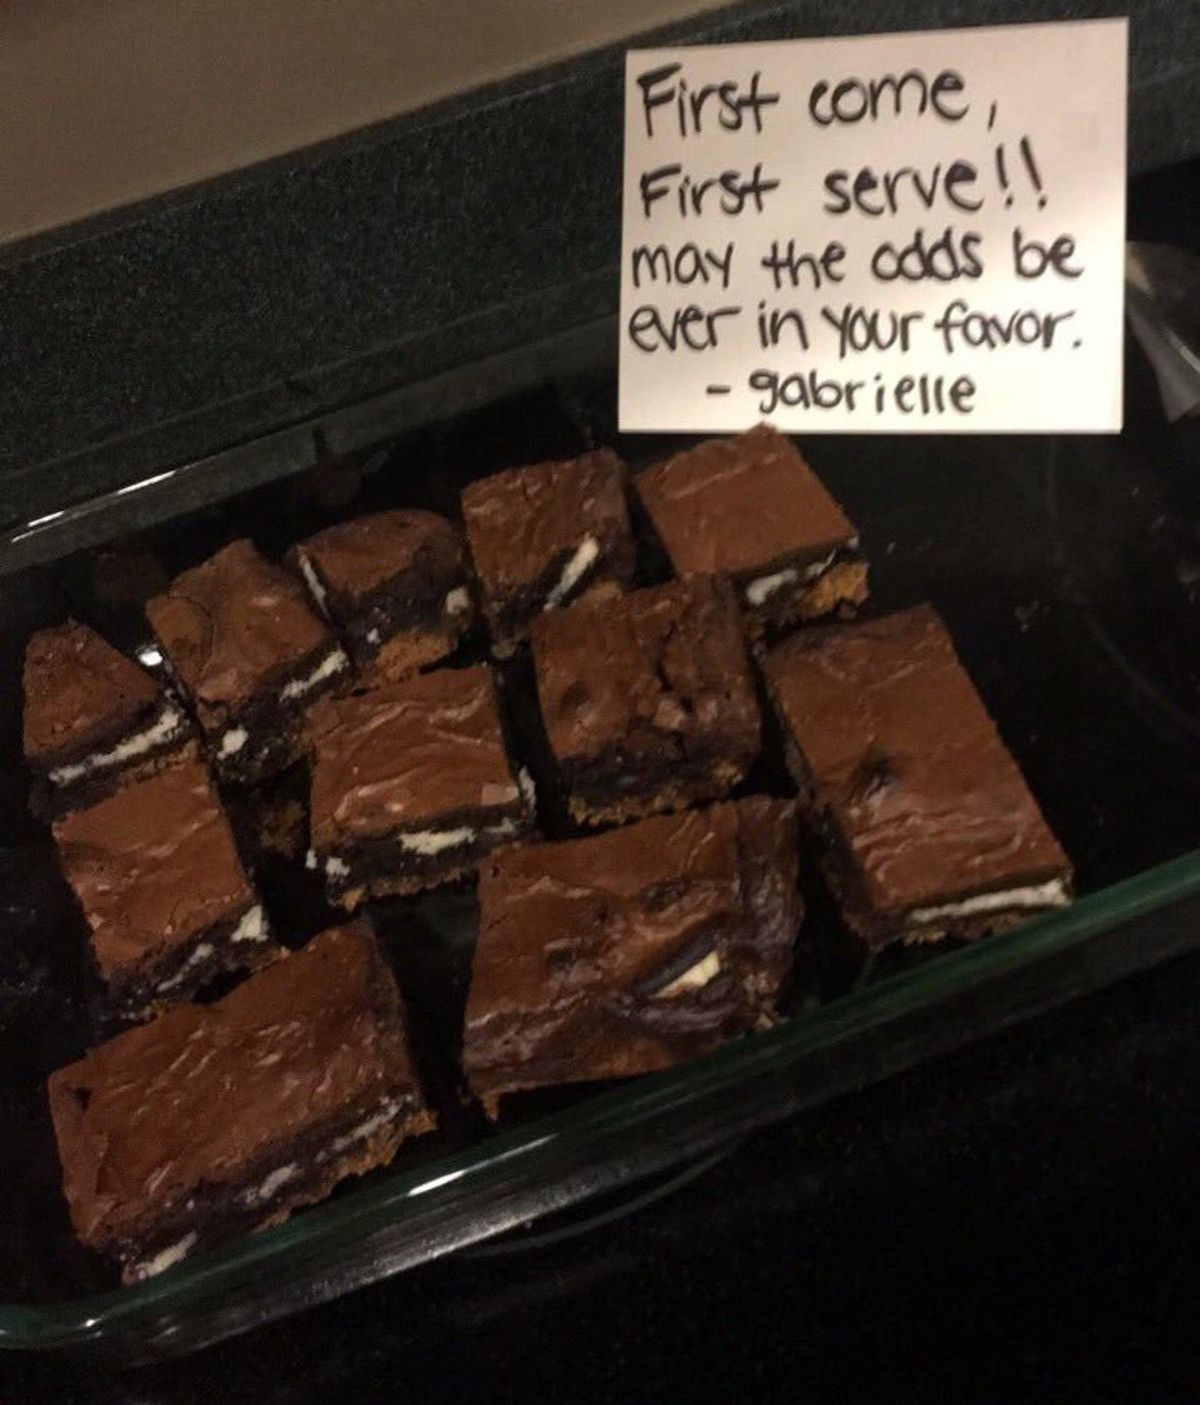 Why A Brownie A Day Keeps the Smiles at Bay